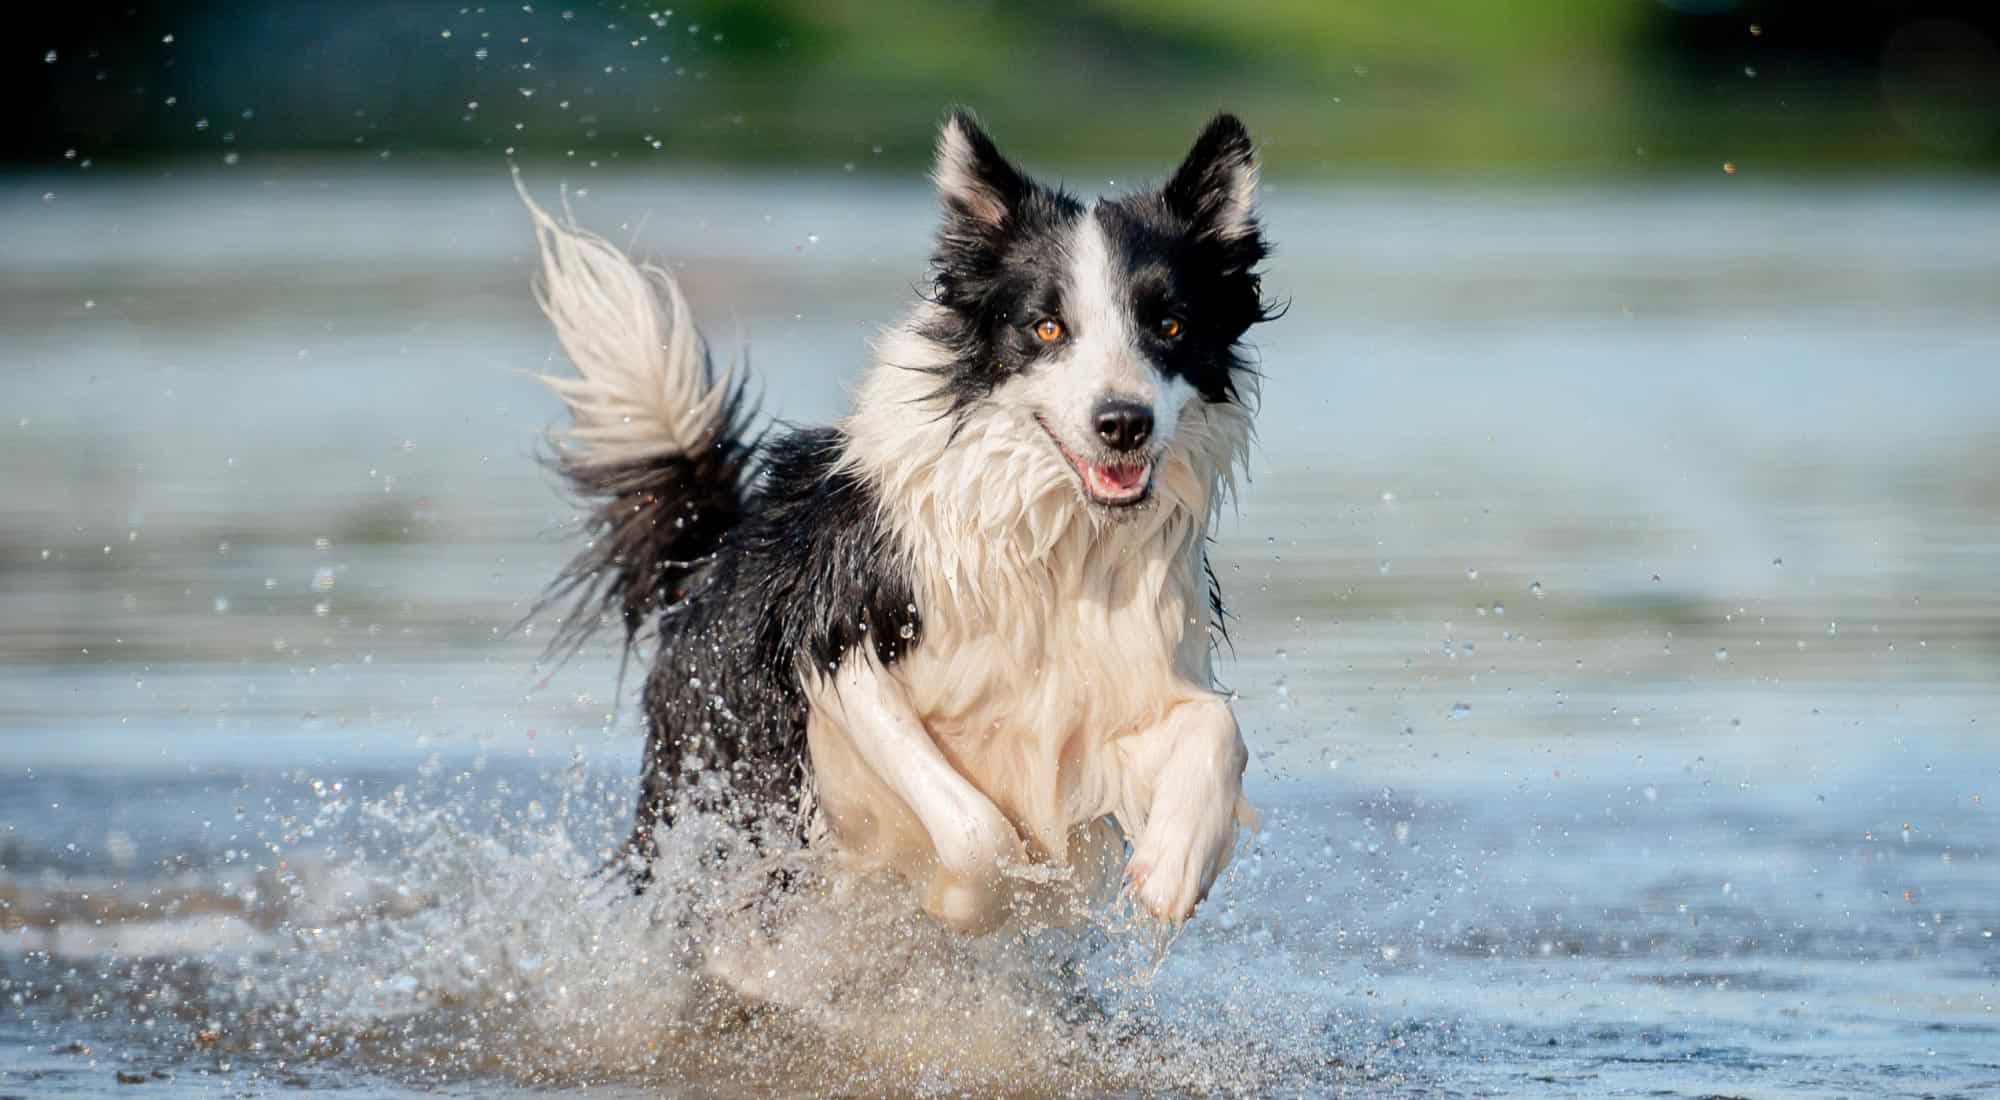 Healthy swim - dog playing in water